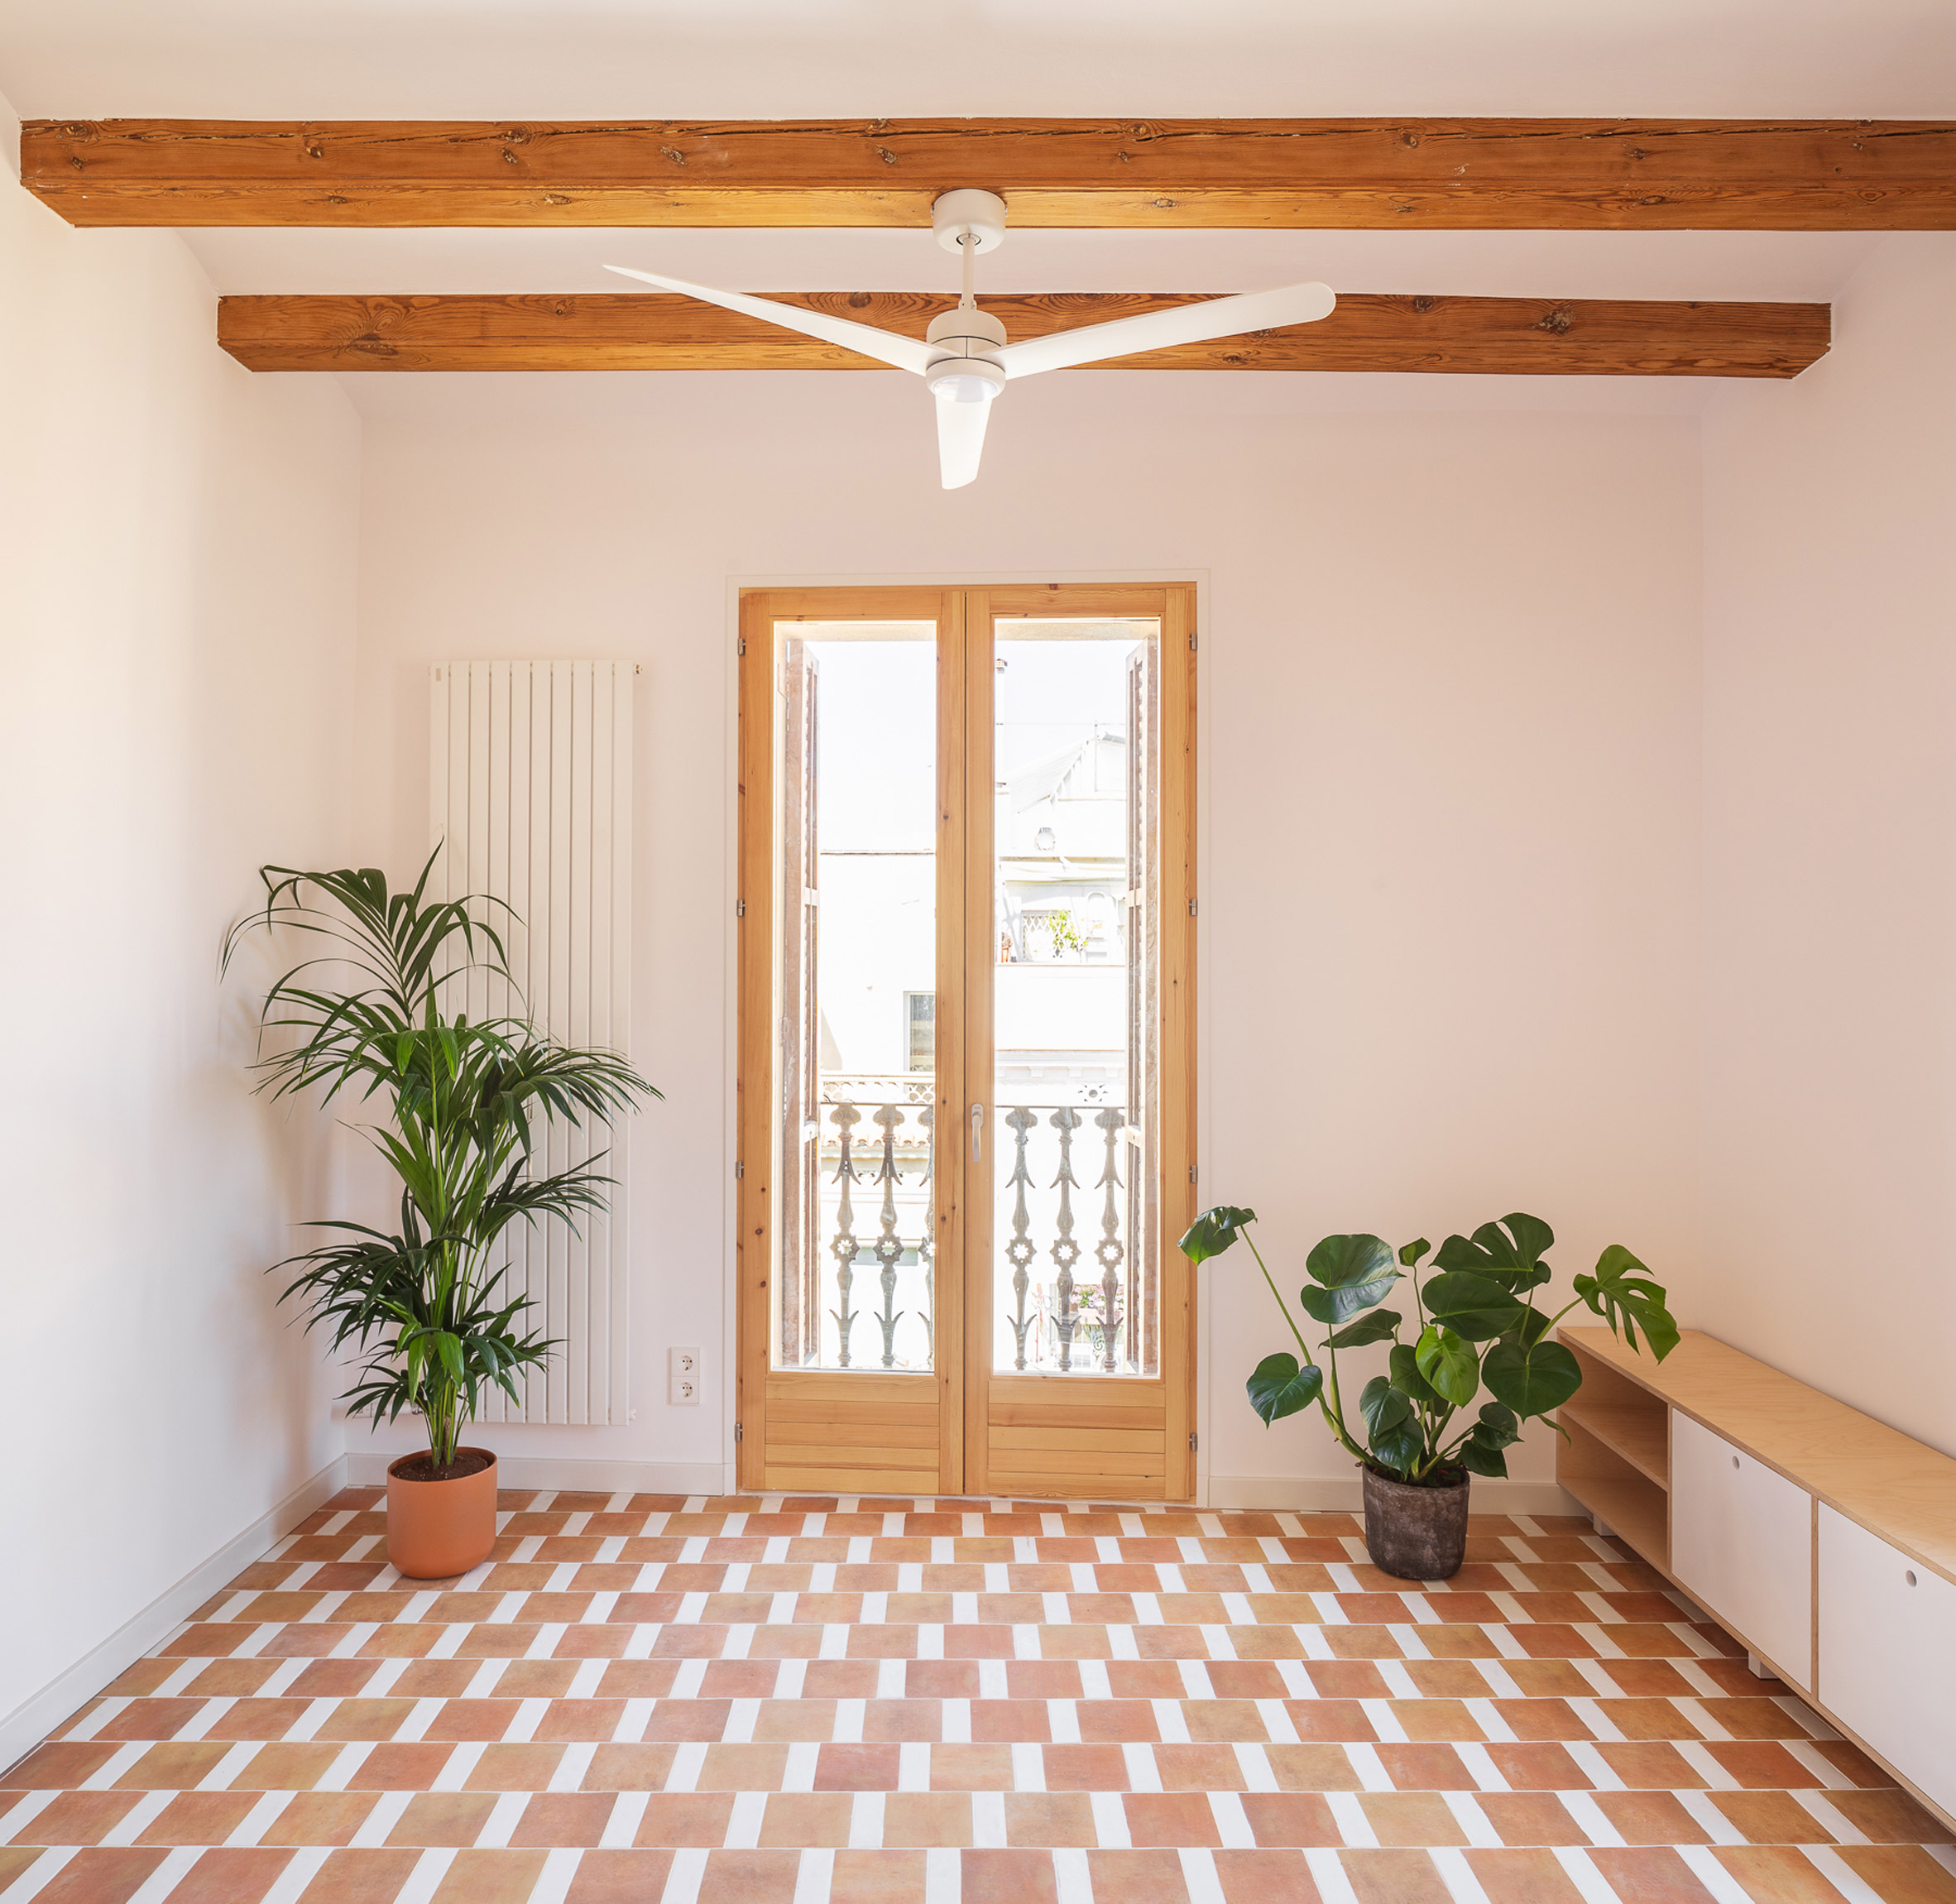 Tiled room in Barcelona apartment interior 